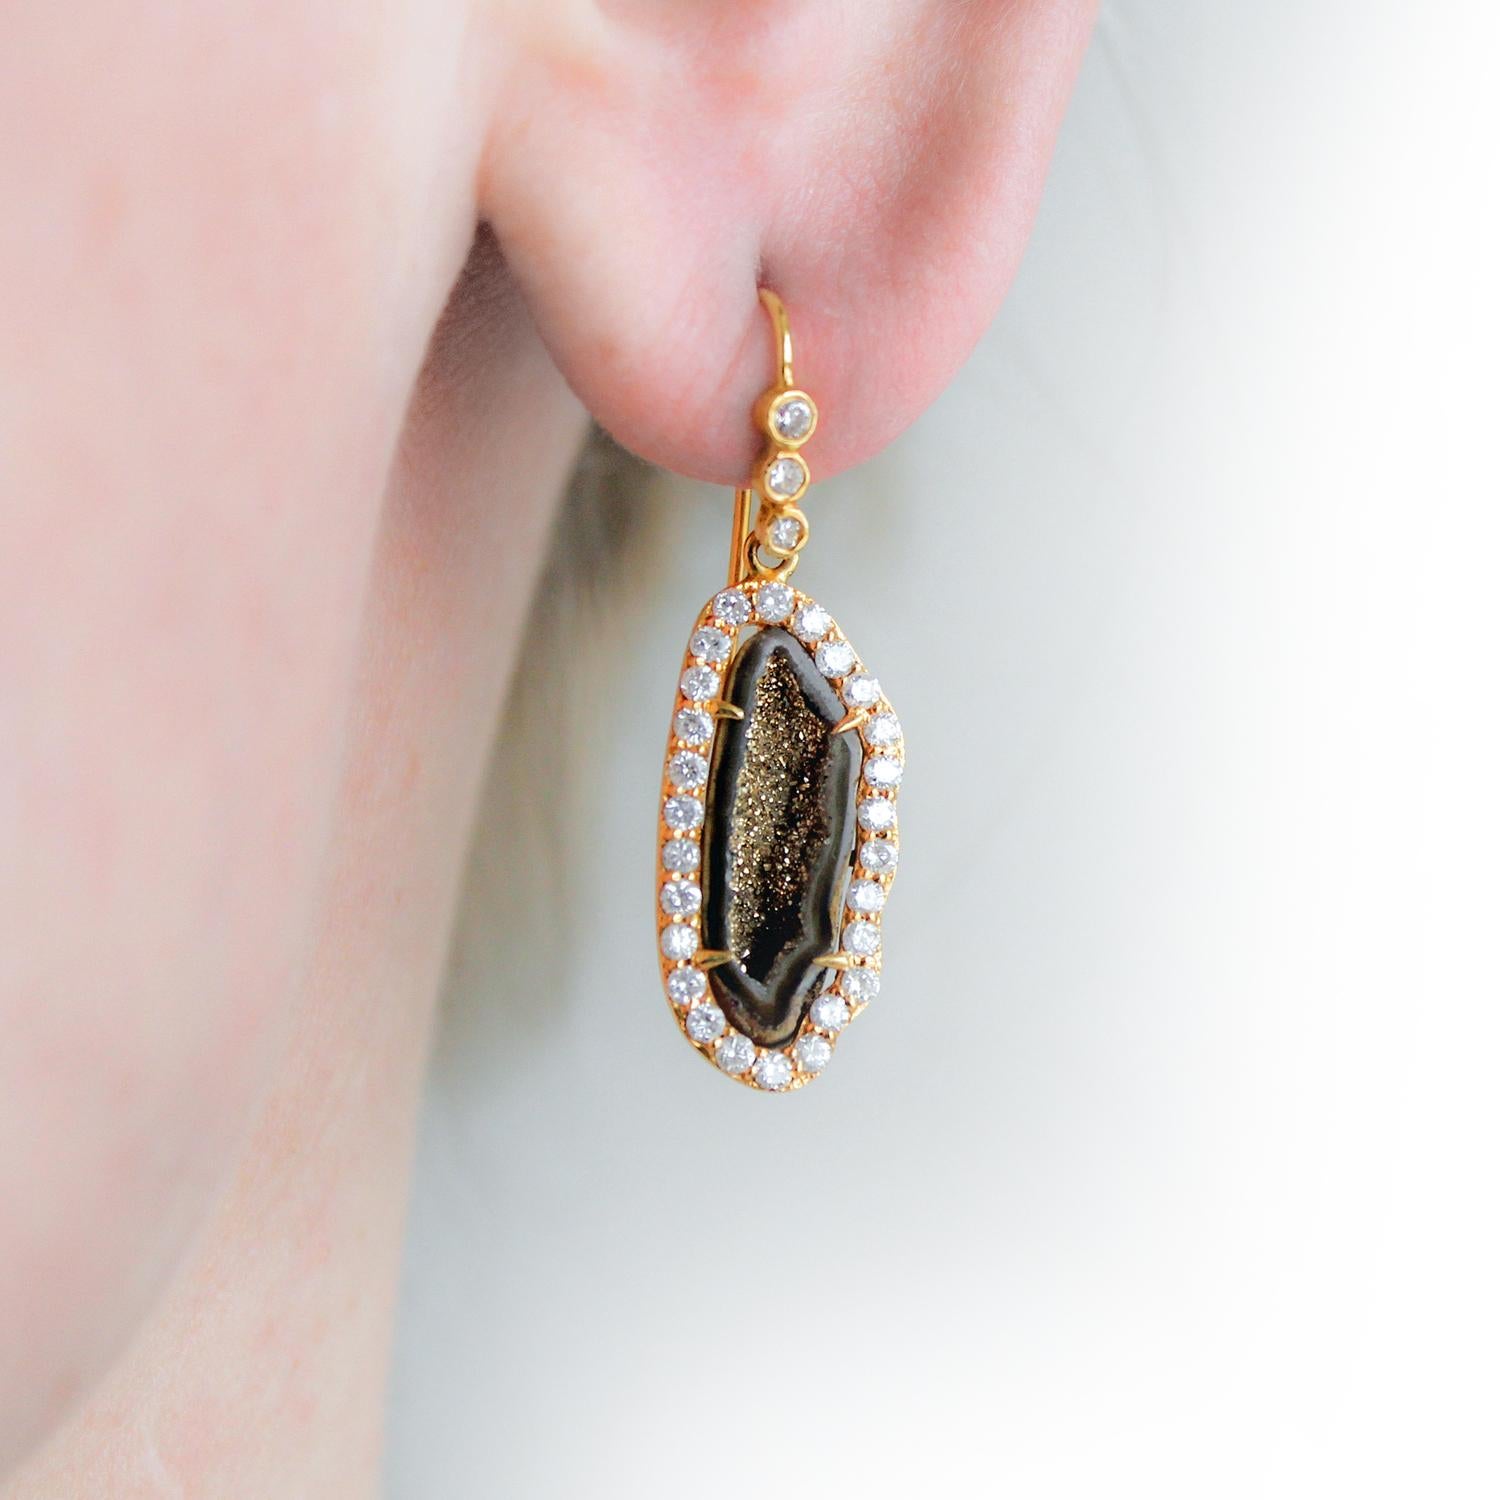 One of a Kind Shimmering Geode Earrings handmade by jewelry artist Lauren Harper in matte-finished 18k yellow gold with two geodes uniquely inlaid with shimmering 18k gold particles and accented by 1.05 total carats of round brilliant-cut white